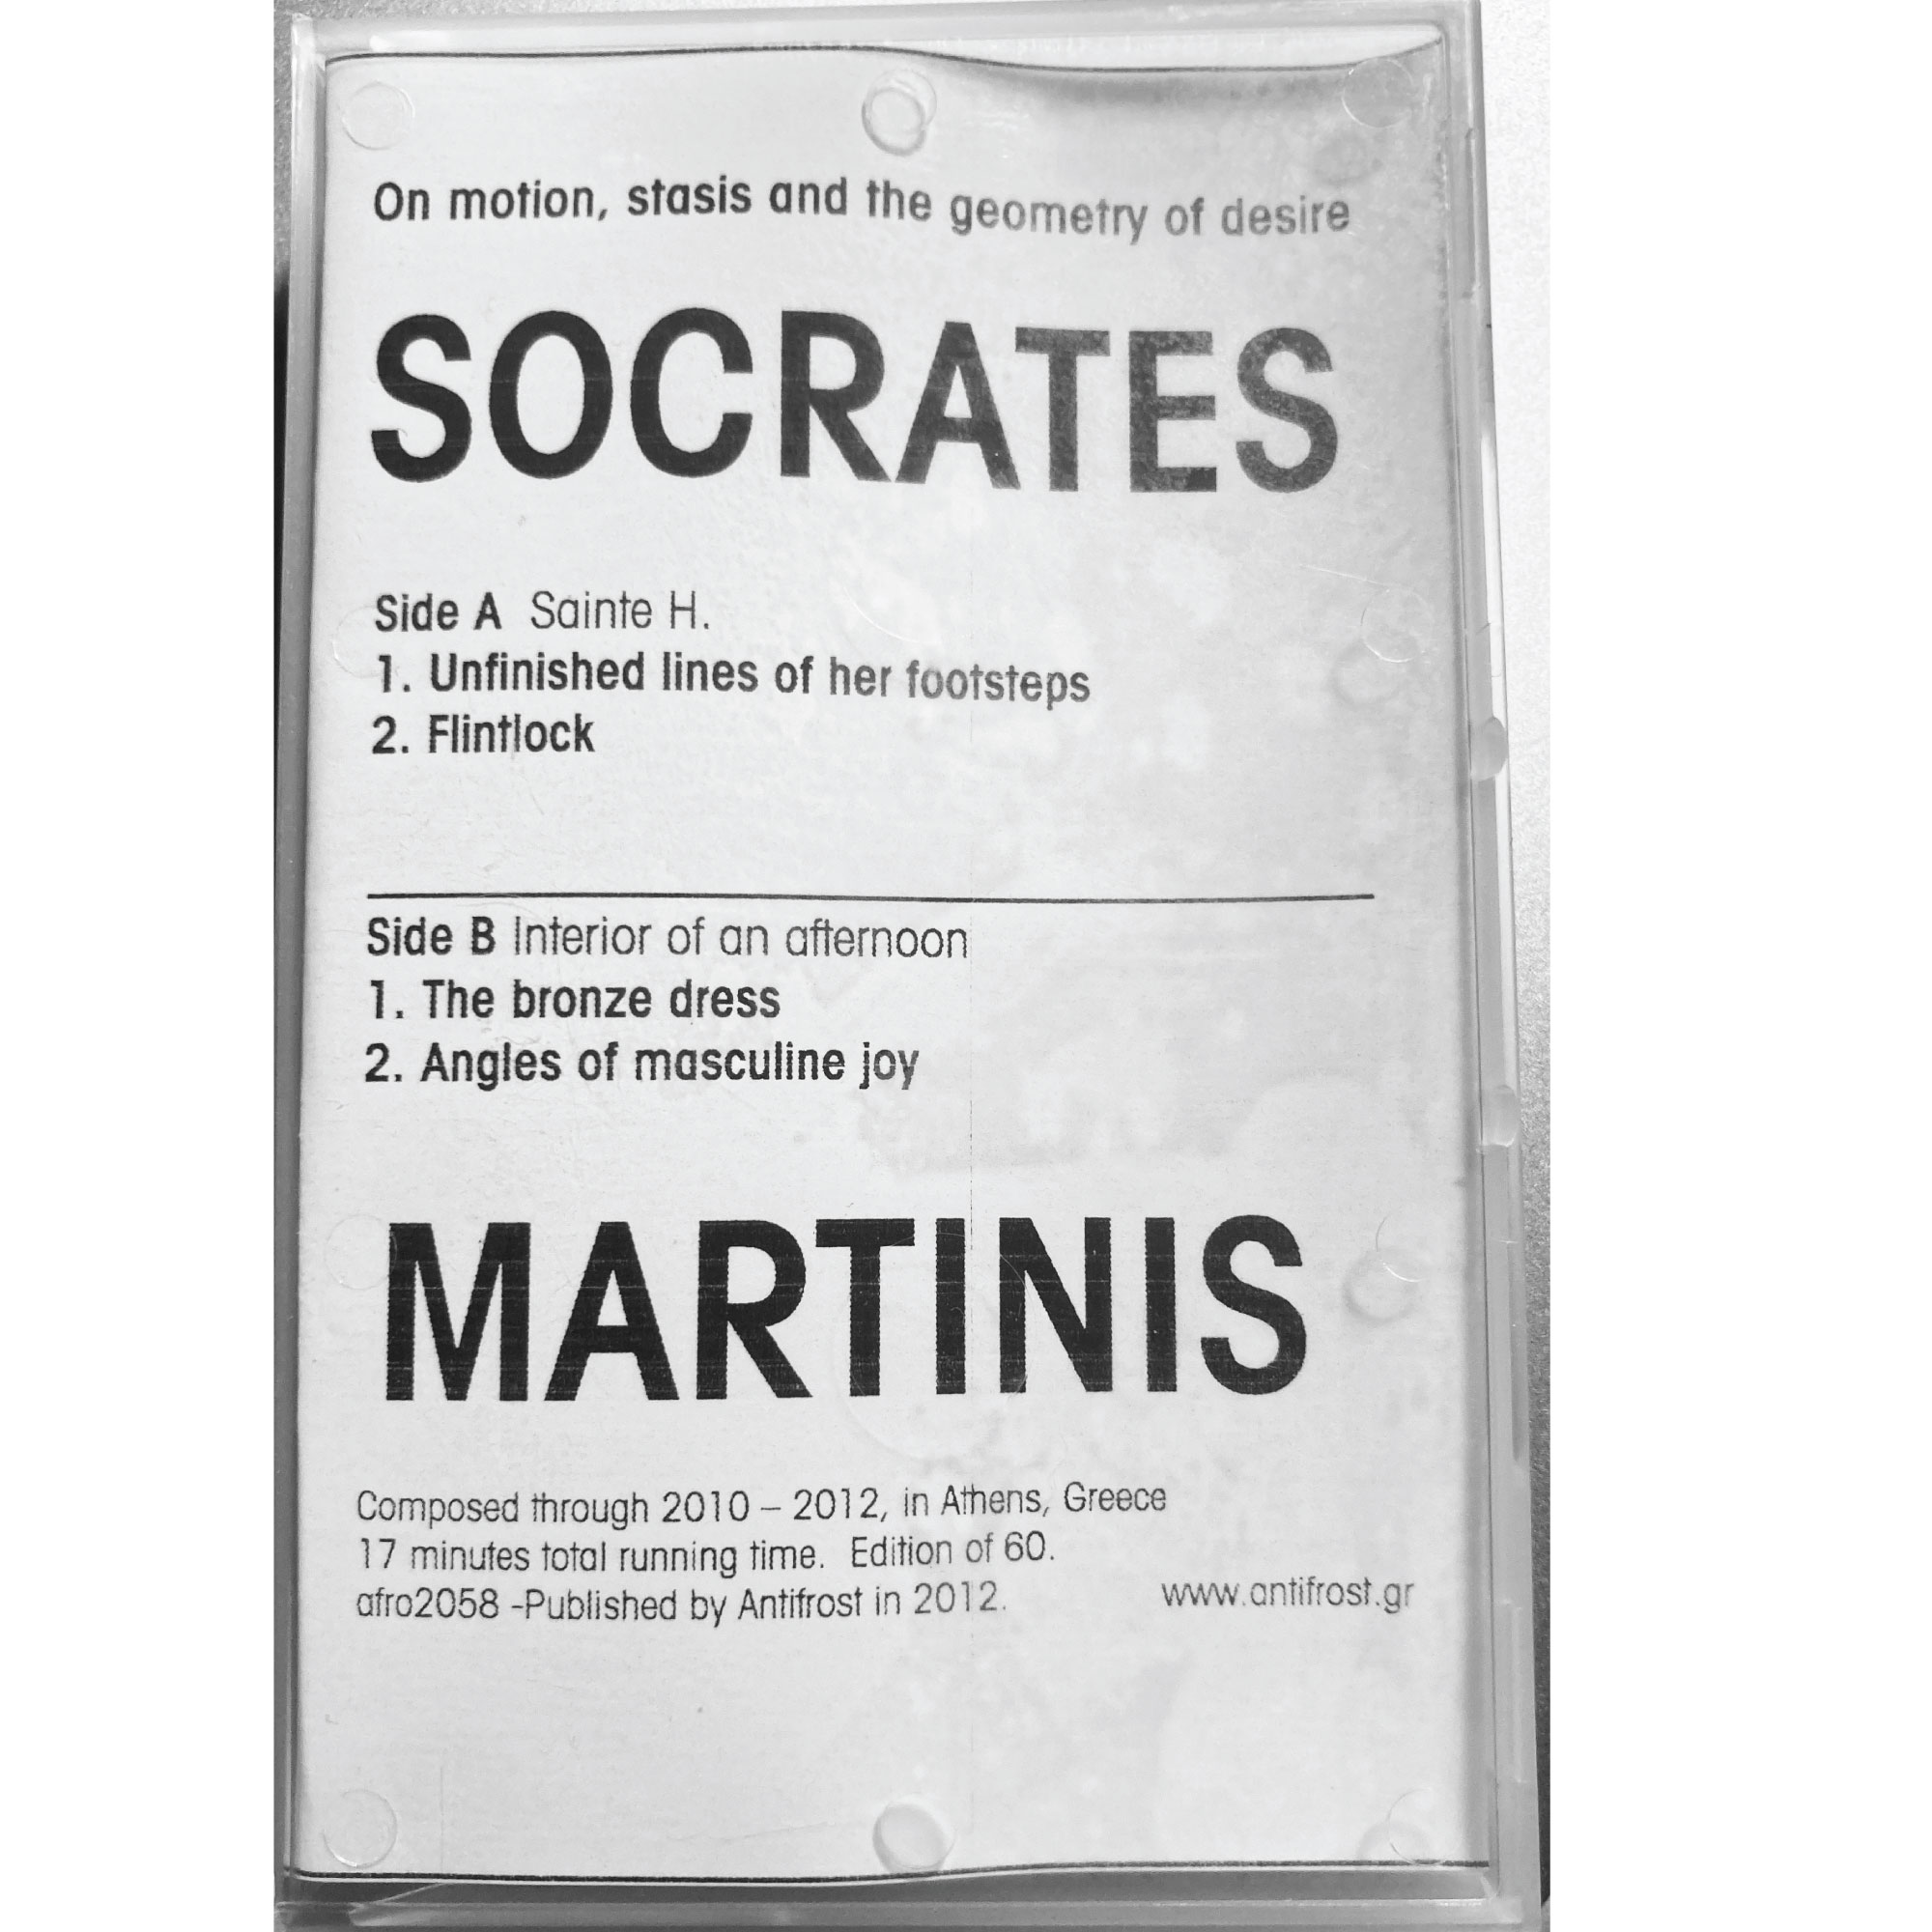 Socrates Martinis – On motion, stasis and the geometry of desire